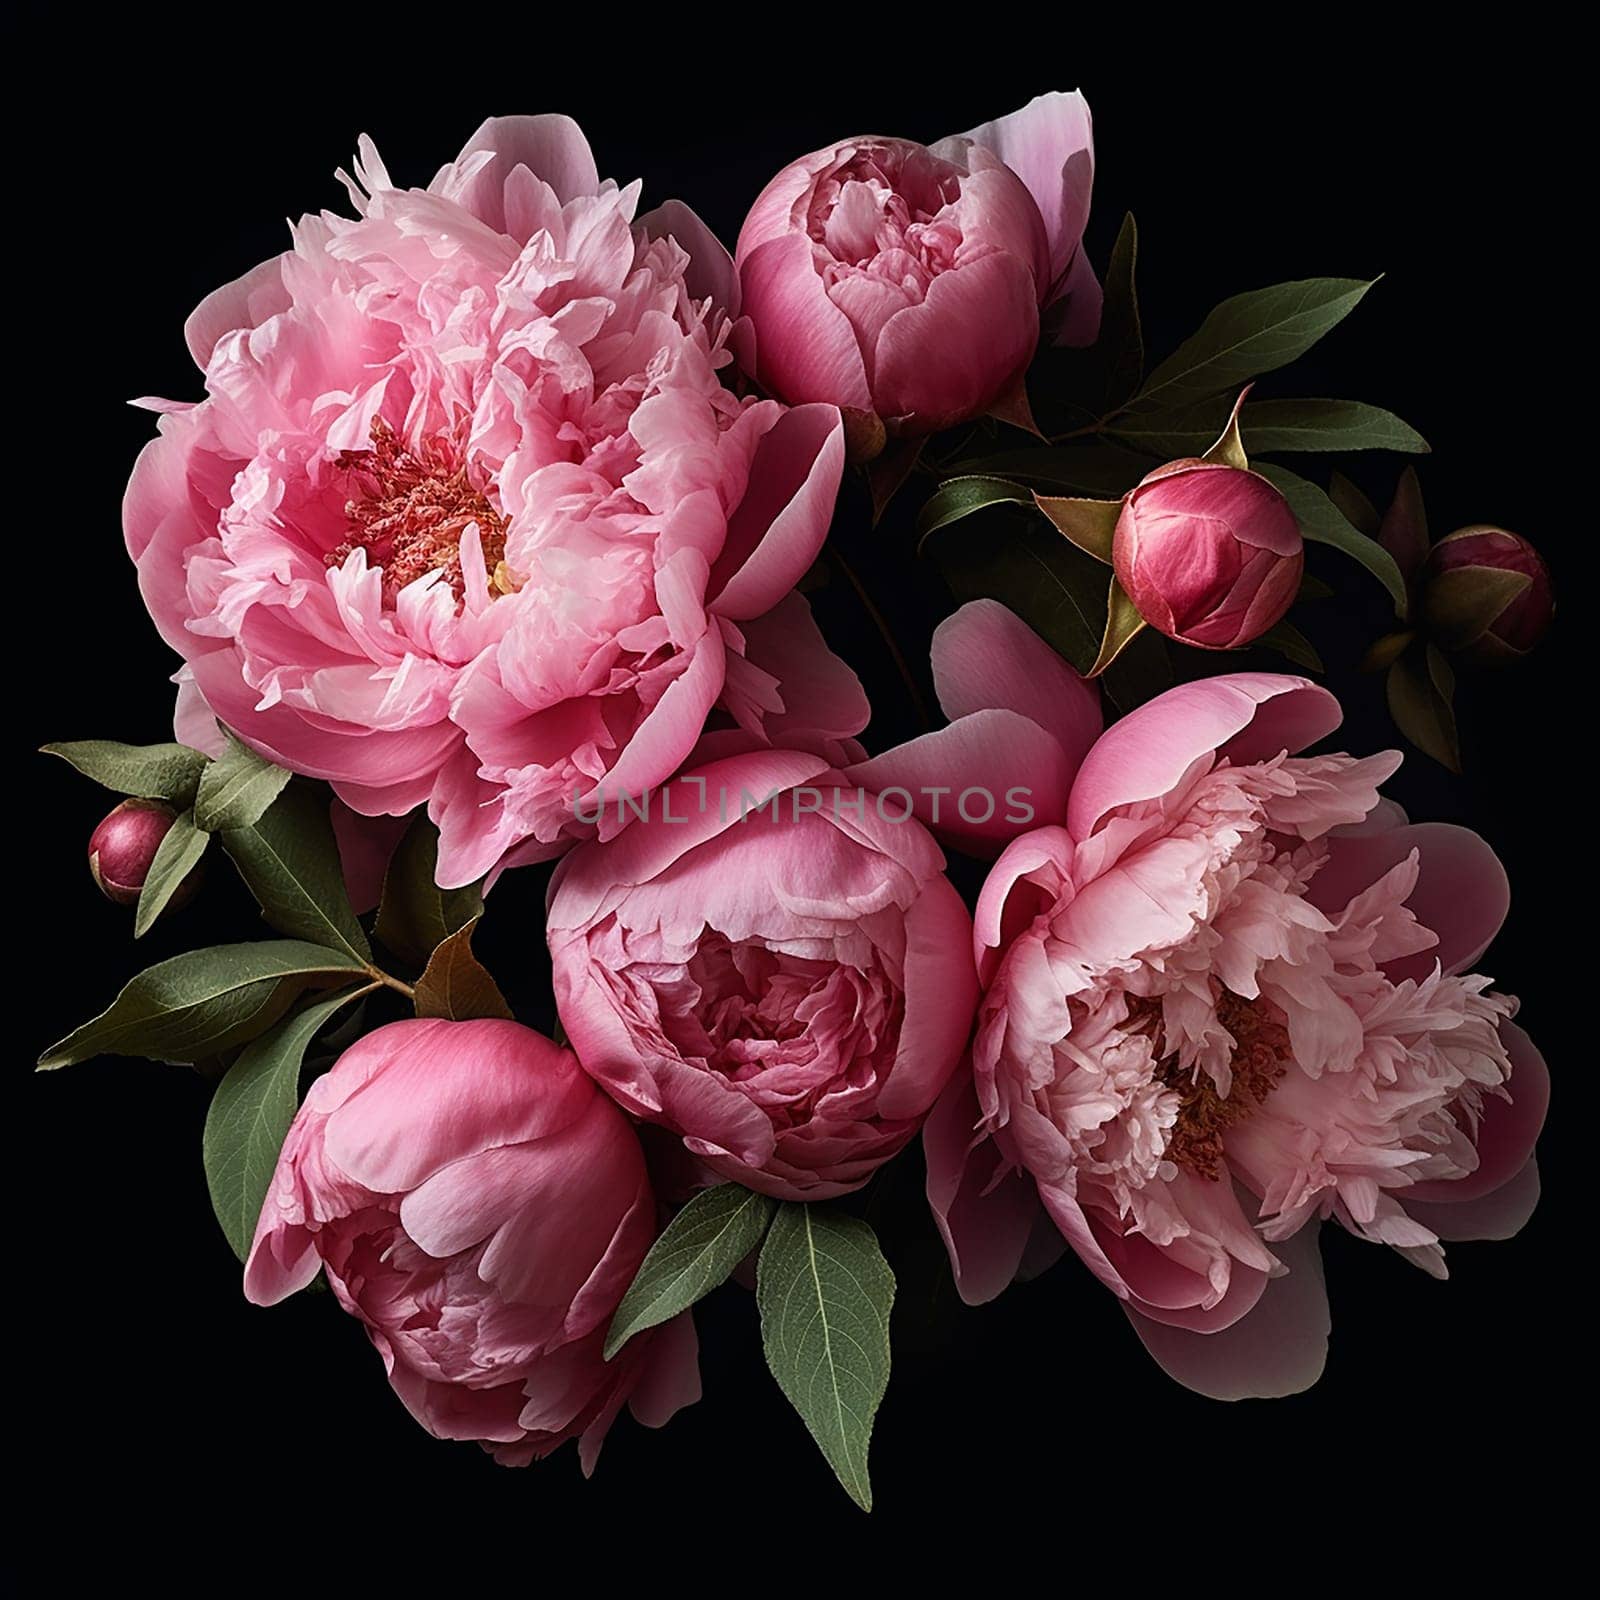 A bouquet of pink peonies against a dark background, highlighting their delicate petals and vibrant color. by Hype2art